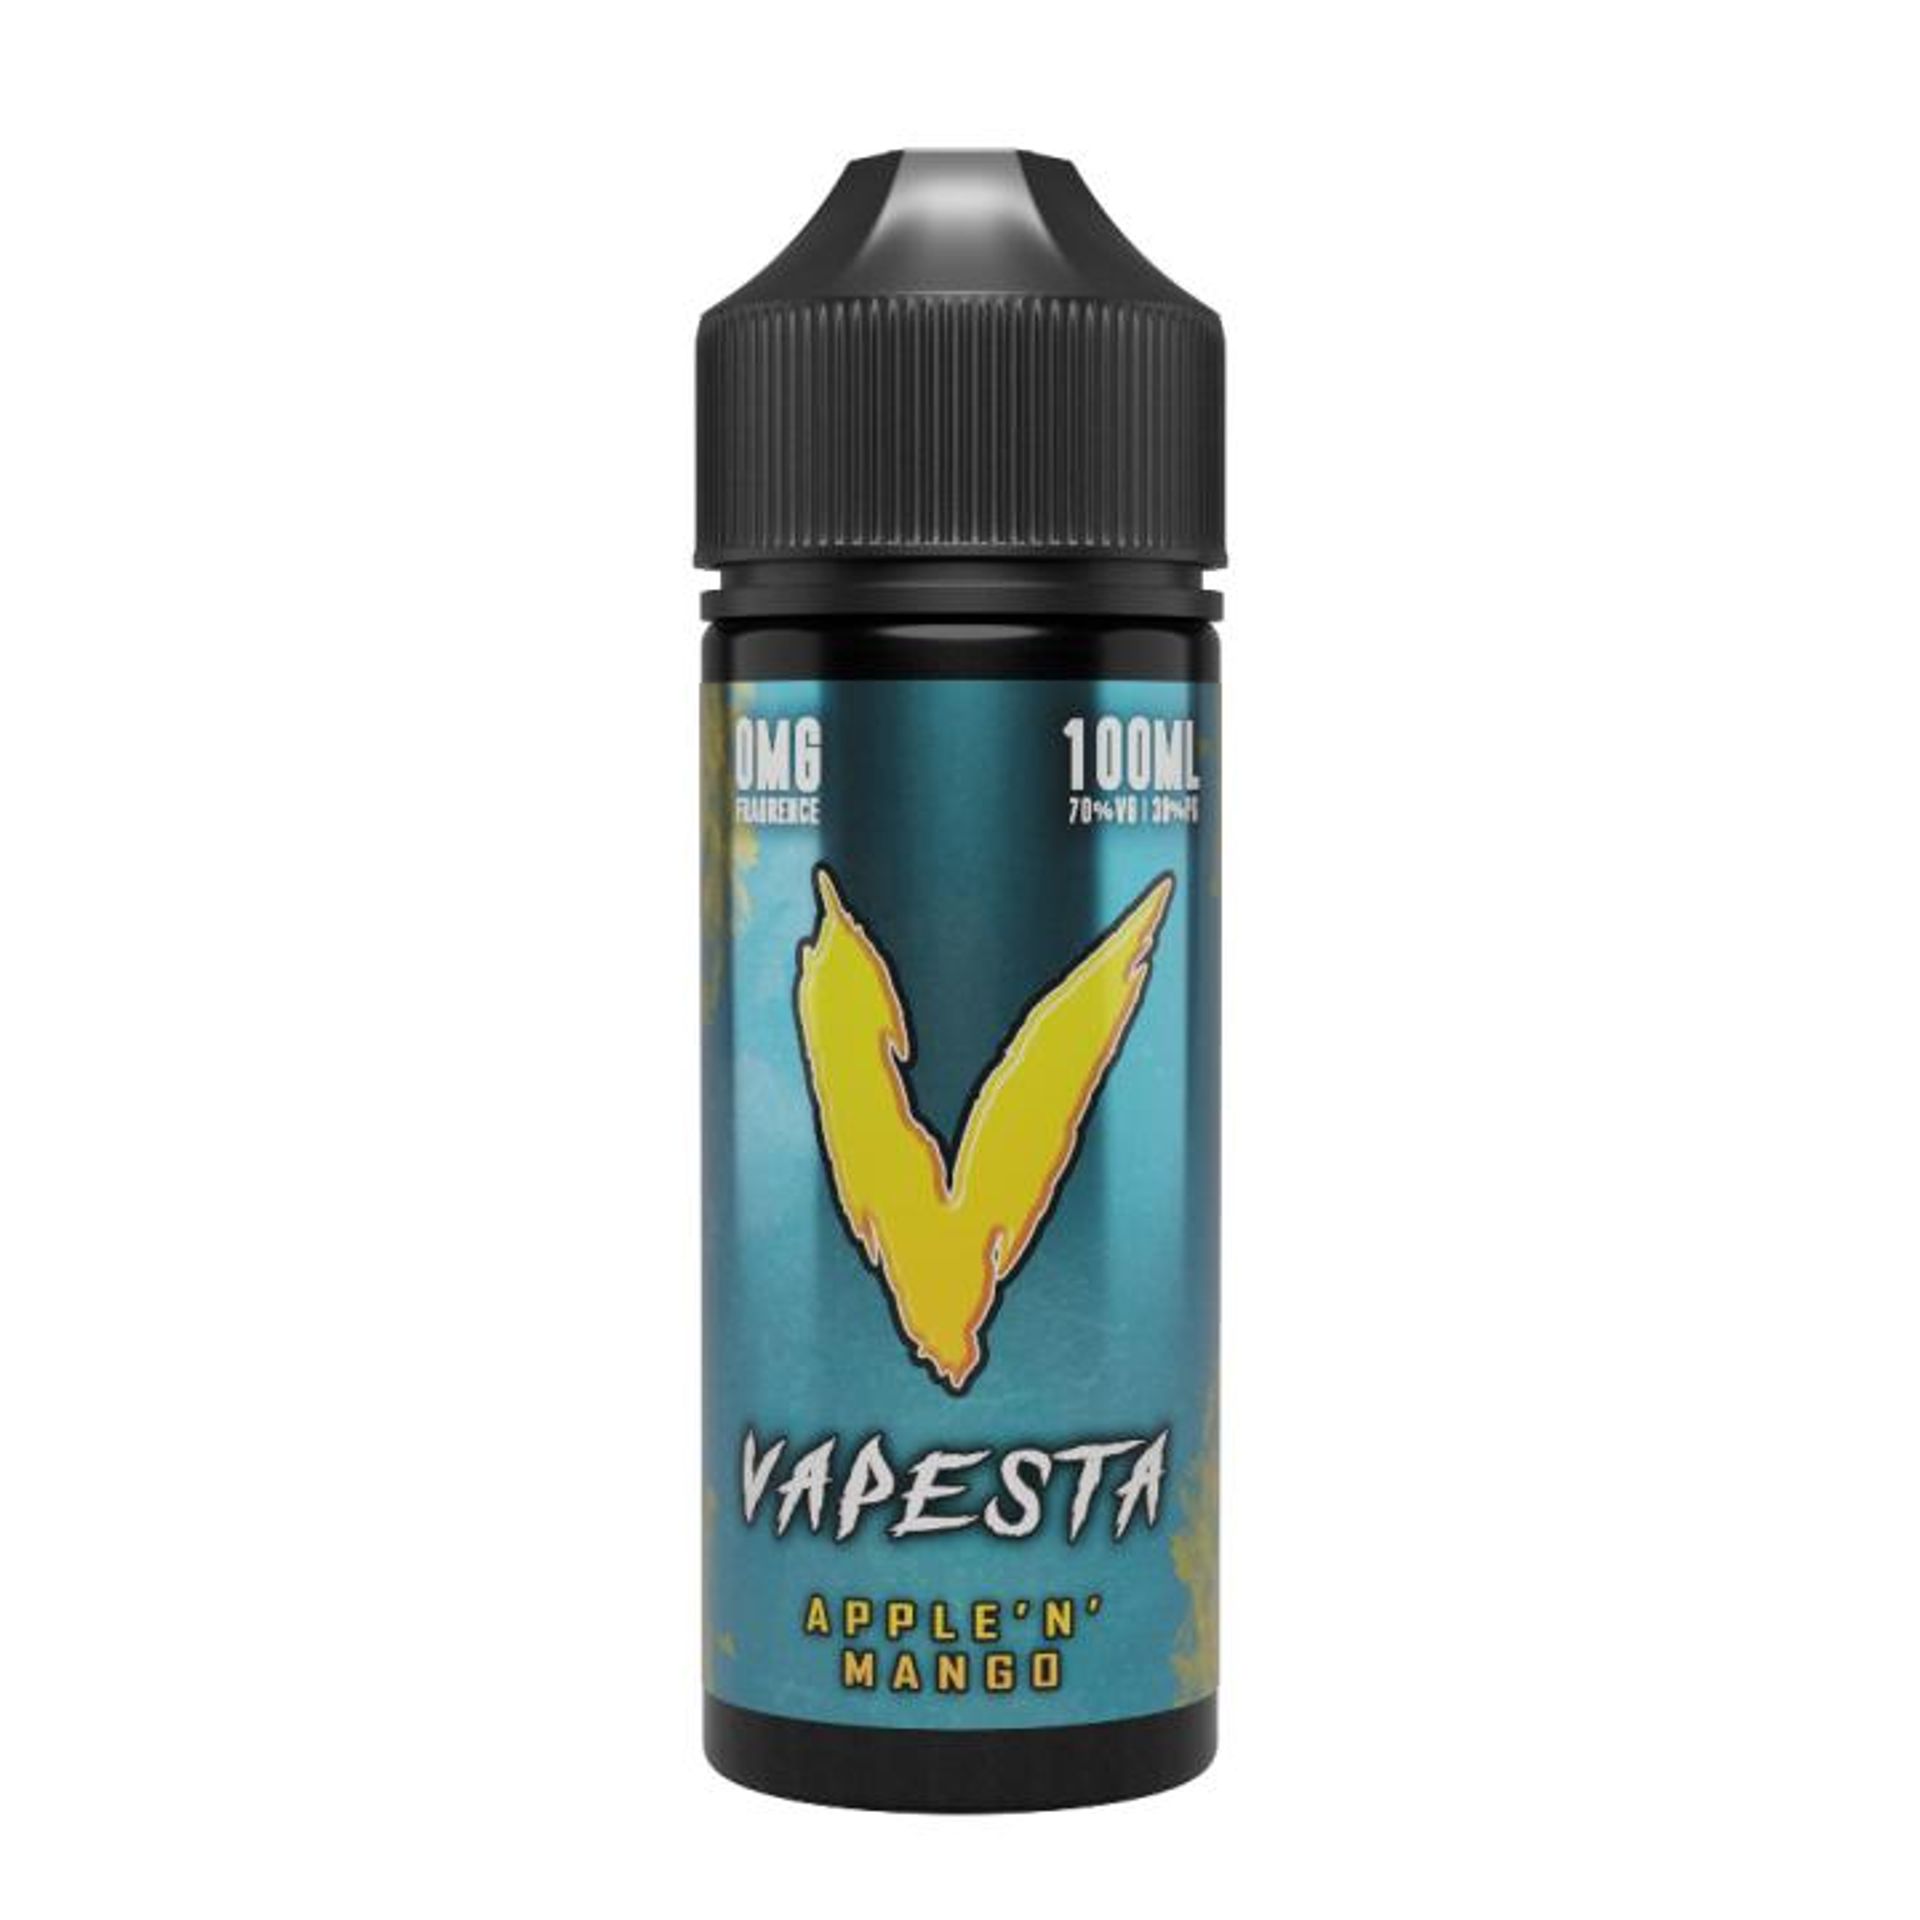 Image of Apple N Mango by Vapesta by Ultimate Puff